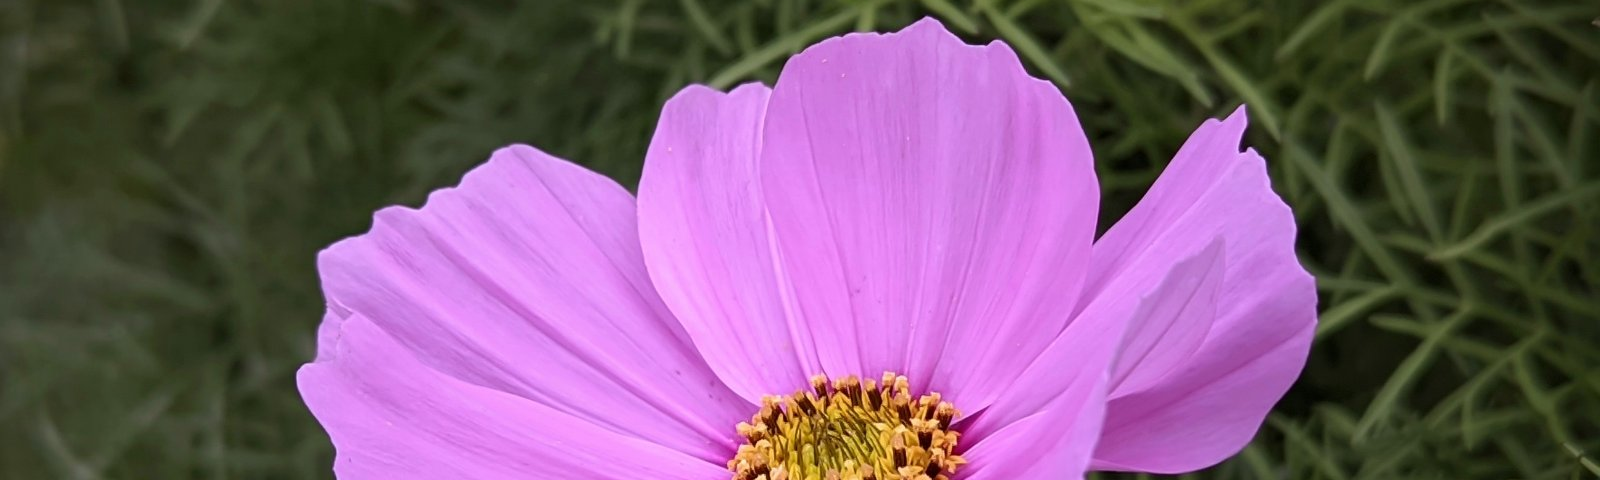 The capture of a pink Cosmos flower.